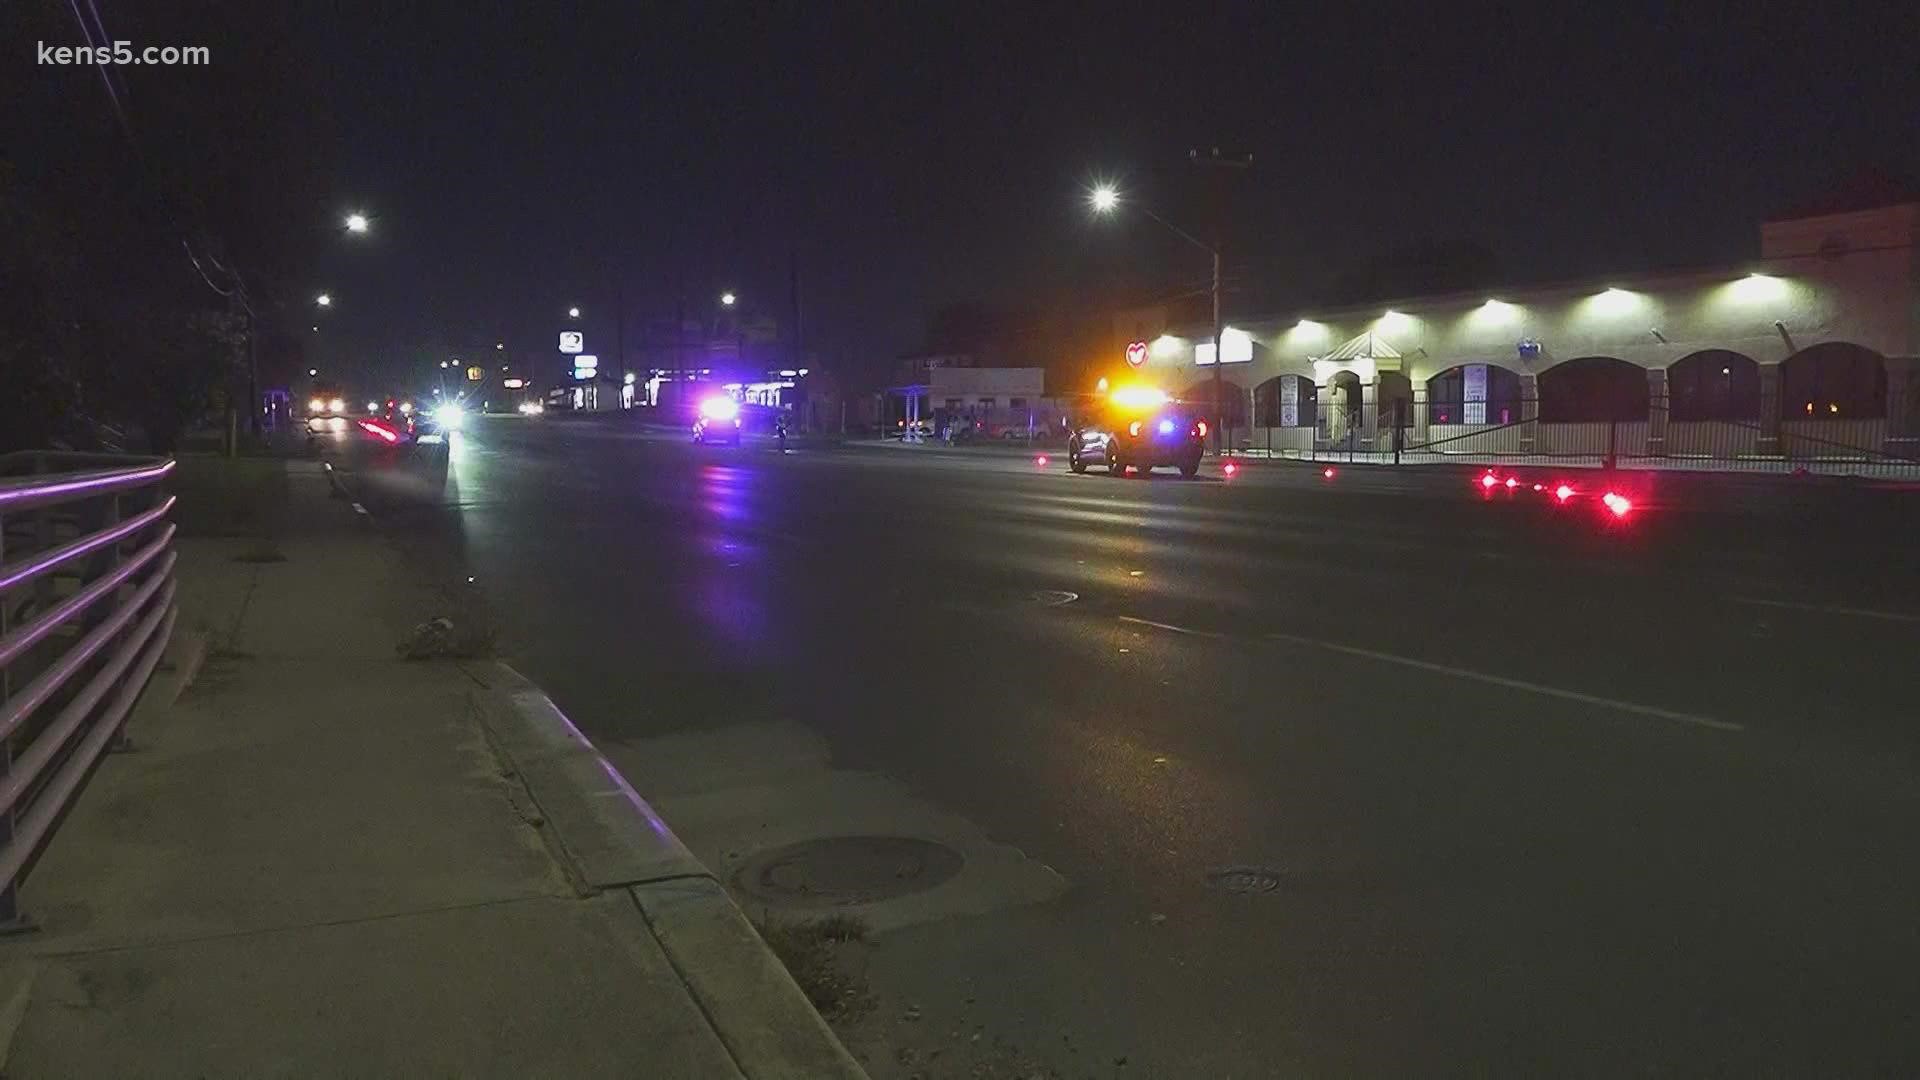 A woman was taken to University Hospital after she was hit by a driver who did not stop to render aid, the San Antonio Police Department said.